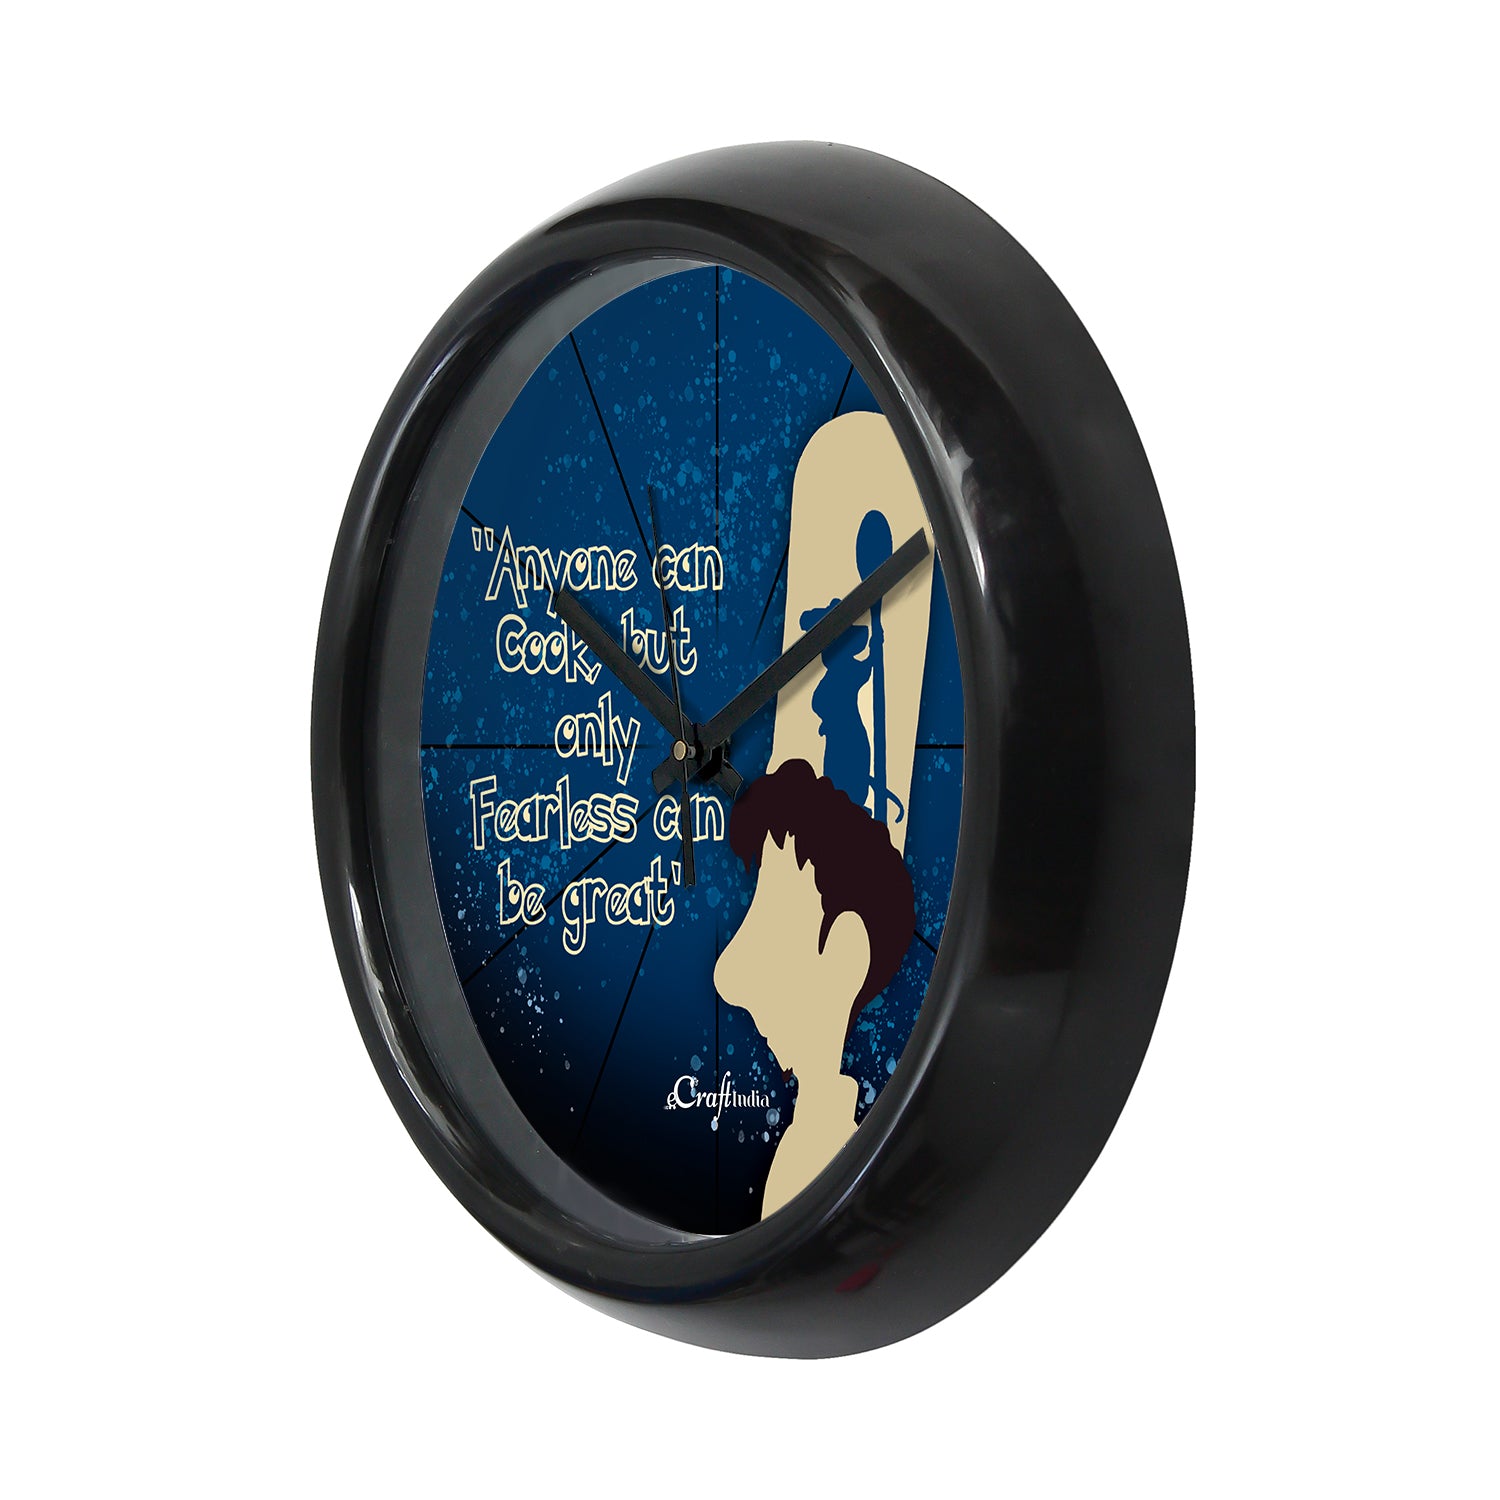 "Anyone Can Cook, But Only Fearless Can Be Great" Designer Round Analog Black Wall Clock 4